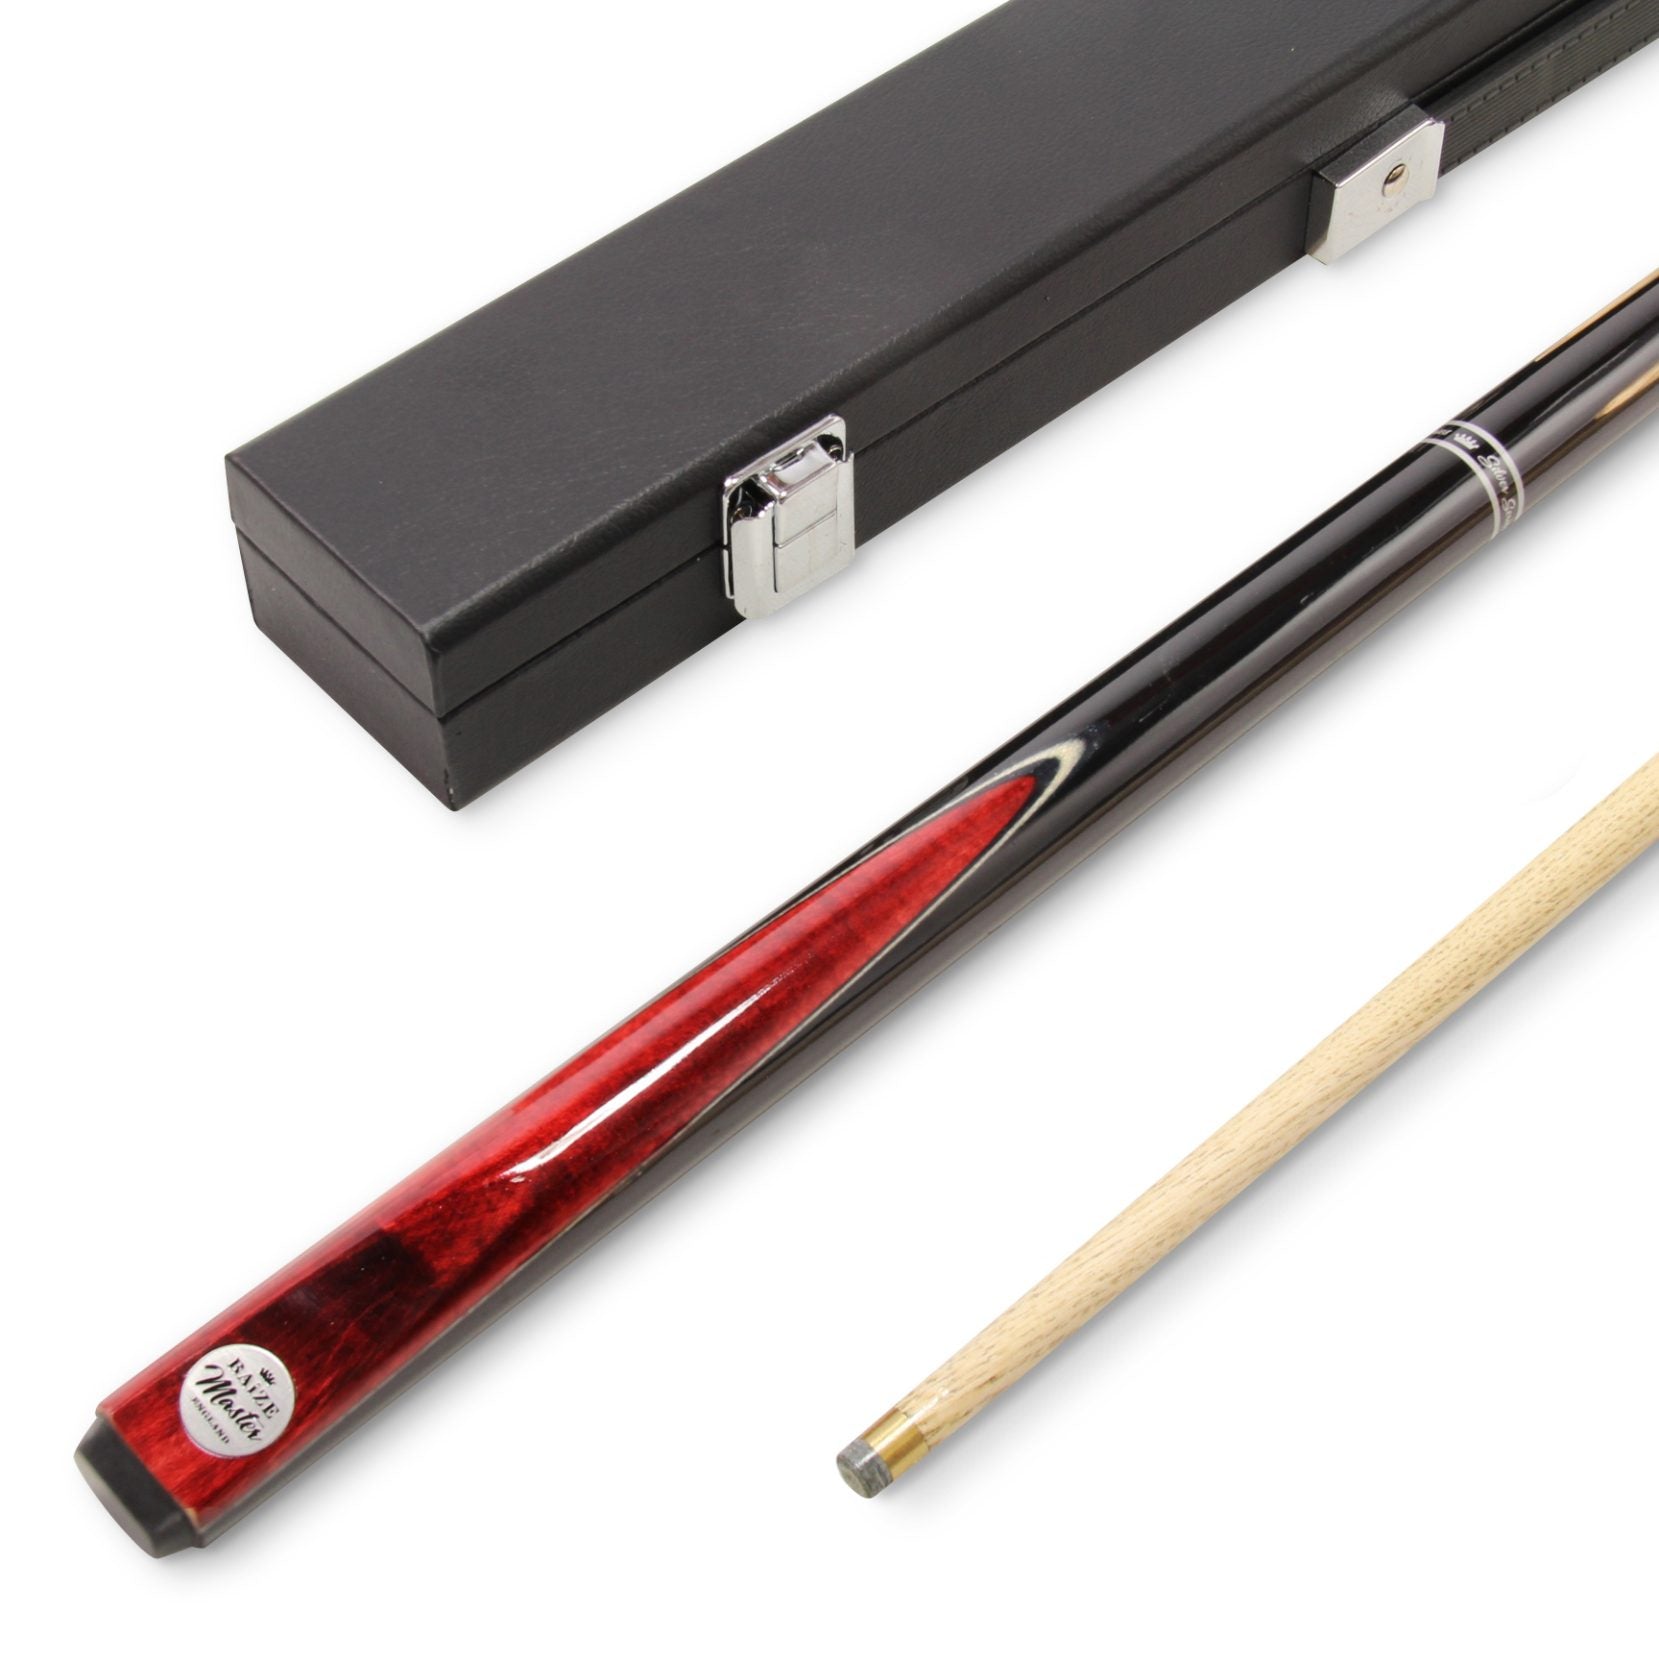 Baize Master Silver Series 42 Inch RED CONQUEST Junior Kids Short Snooker Pool 2pc Ash Cue Set with MEDIUM BLACK HARD CASE - 9.5mm